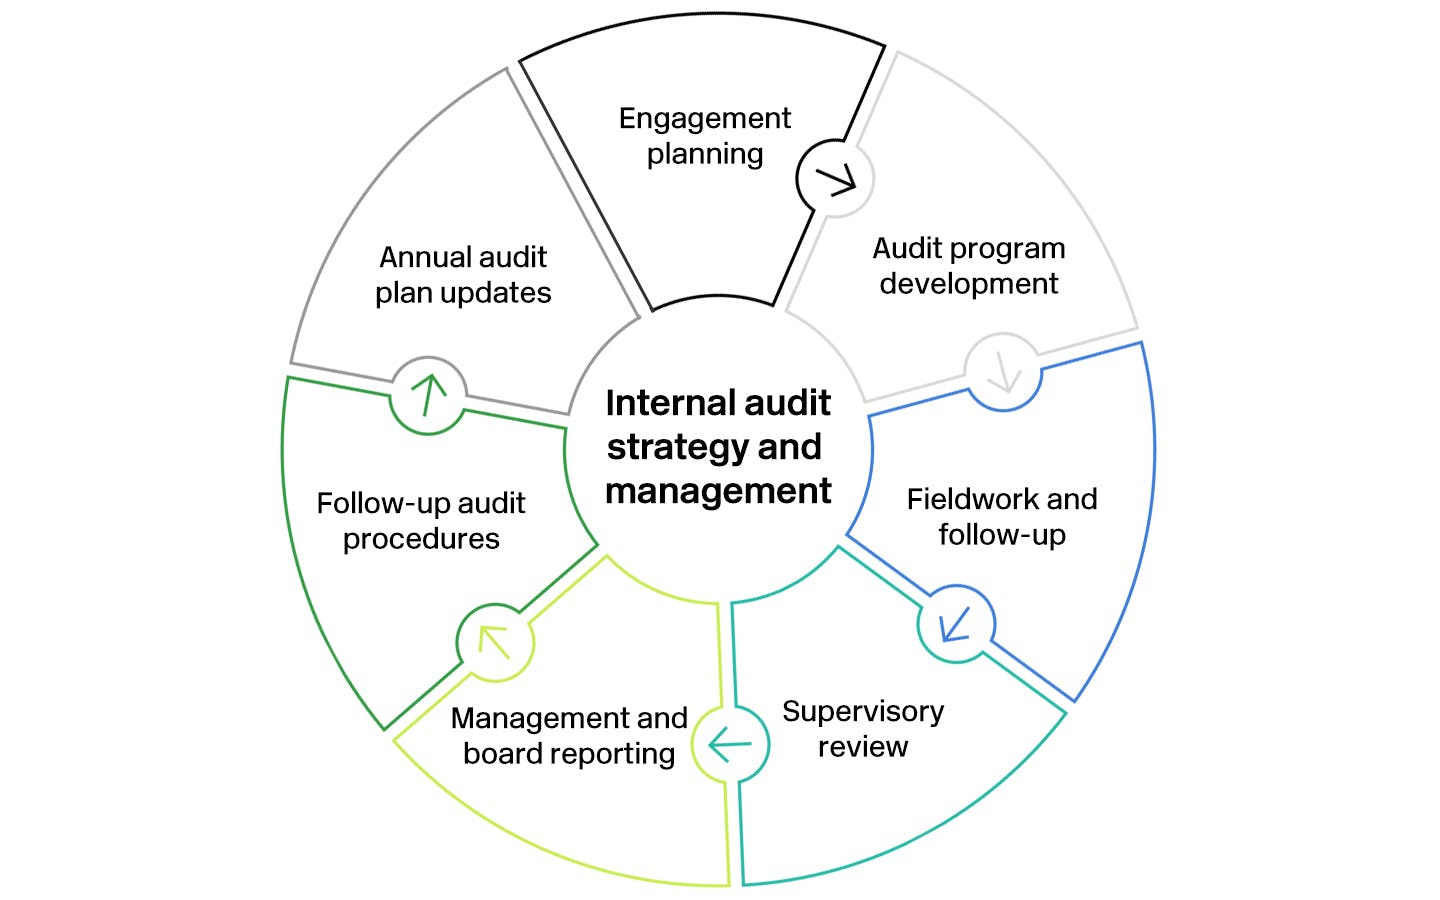 Internal audit strategy and management cycle